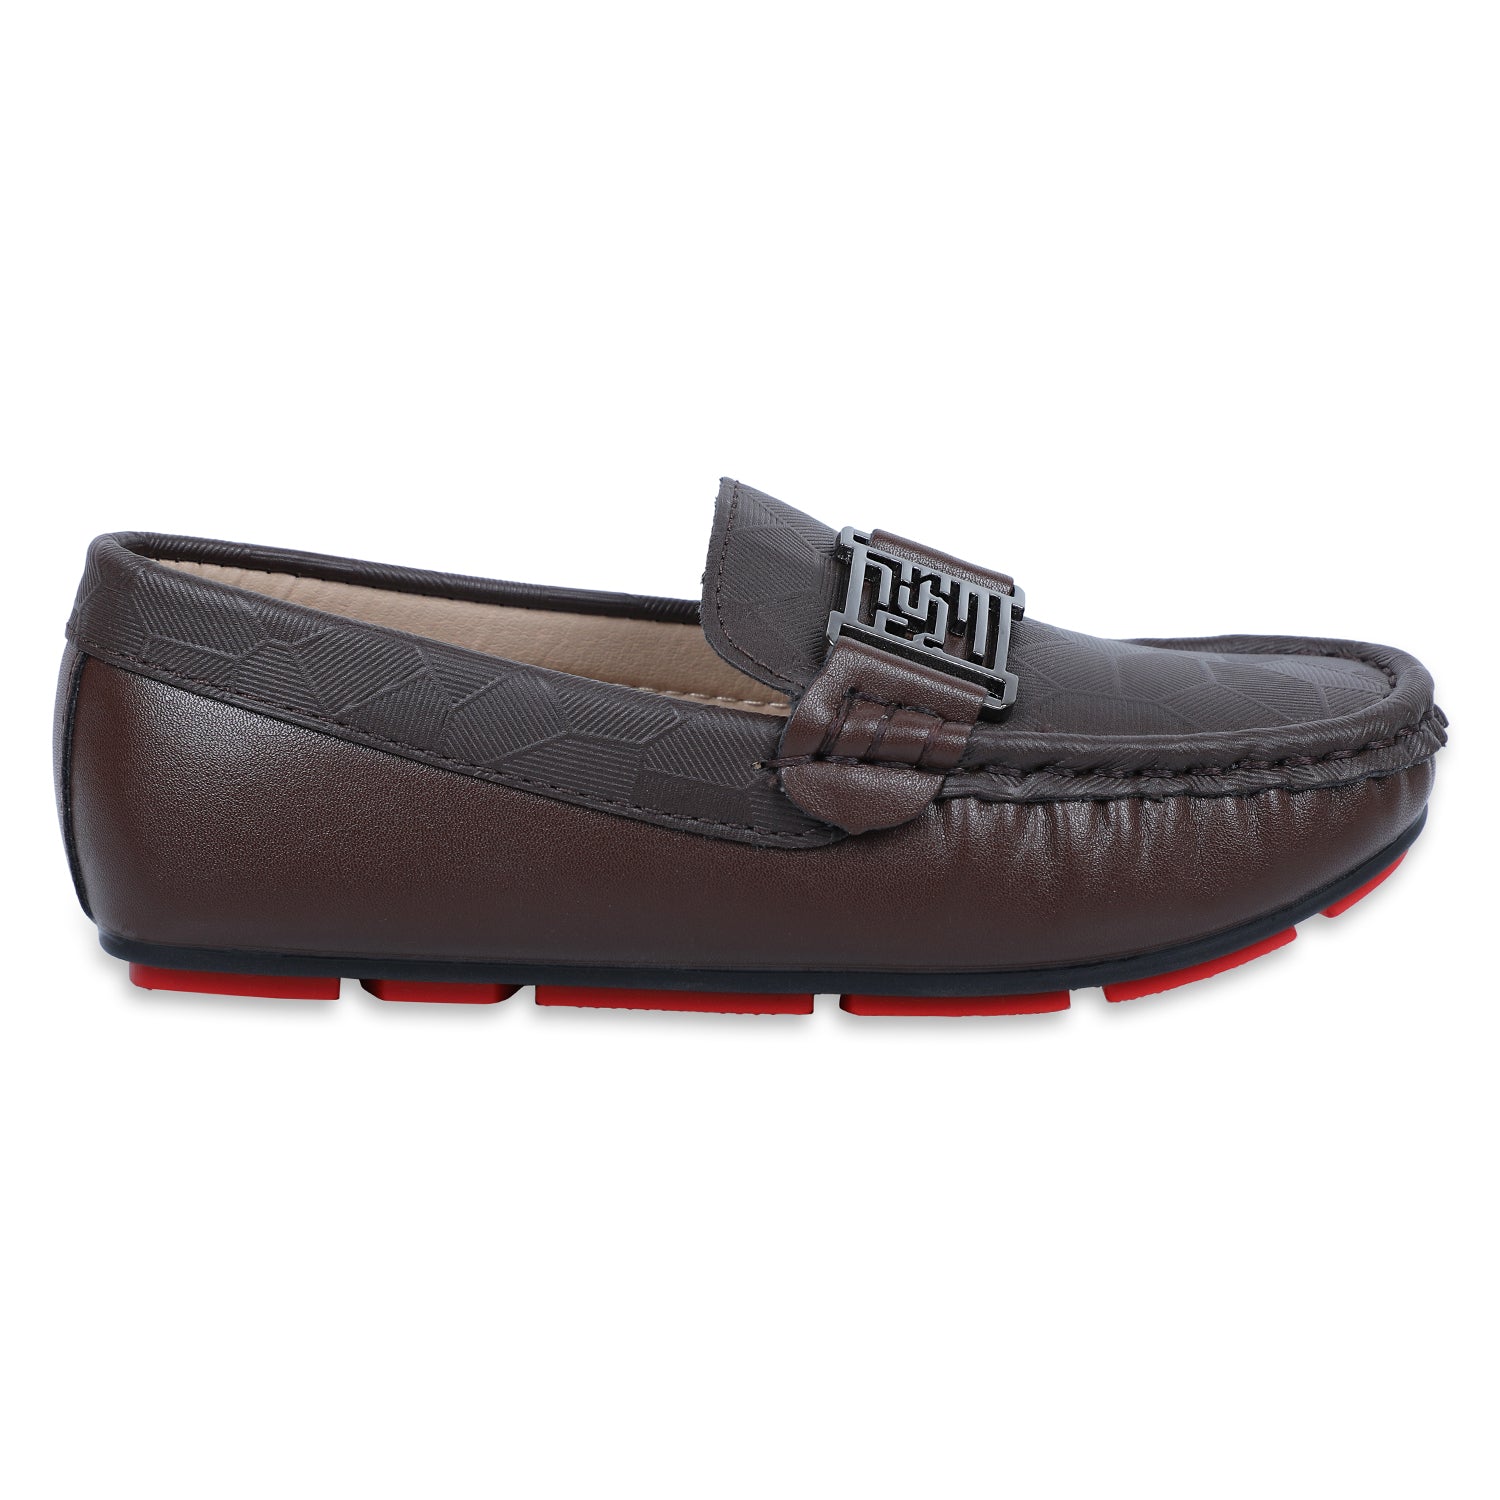 Baby Moo x Bash Kids Textured Leatherite Loafer Shoes - Brown